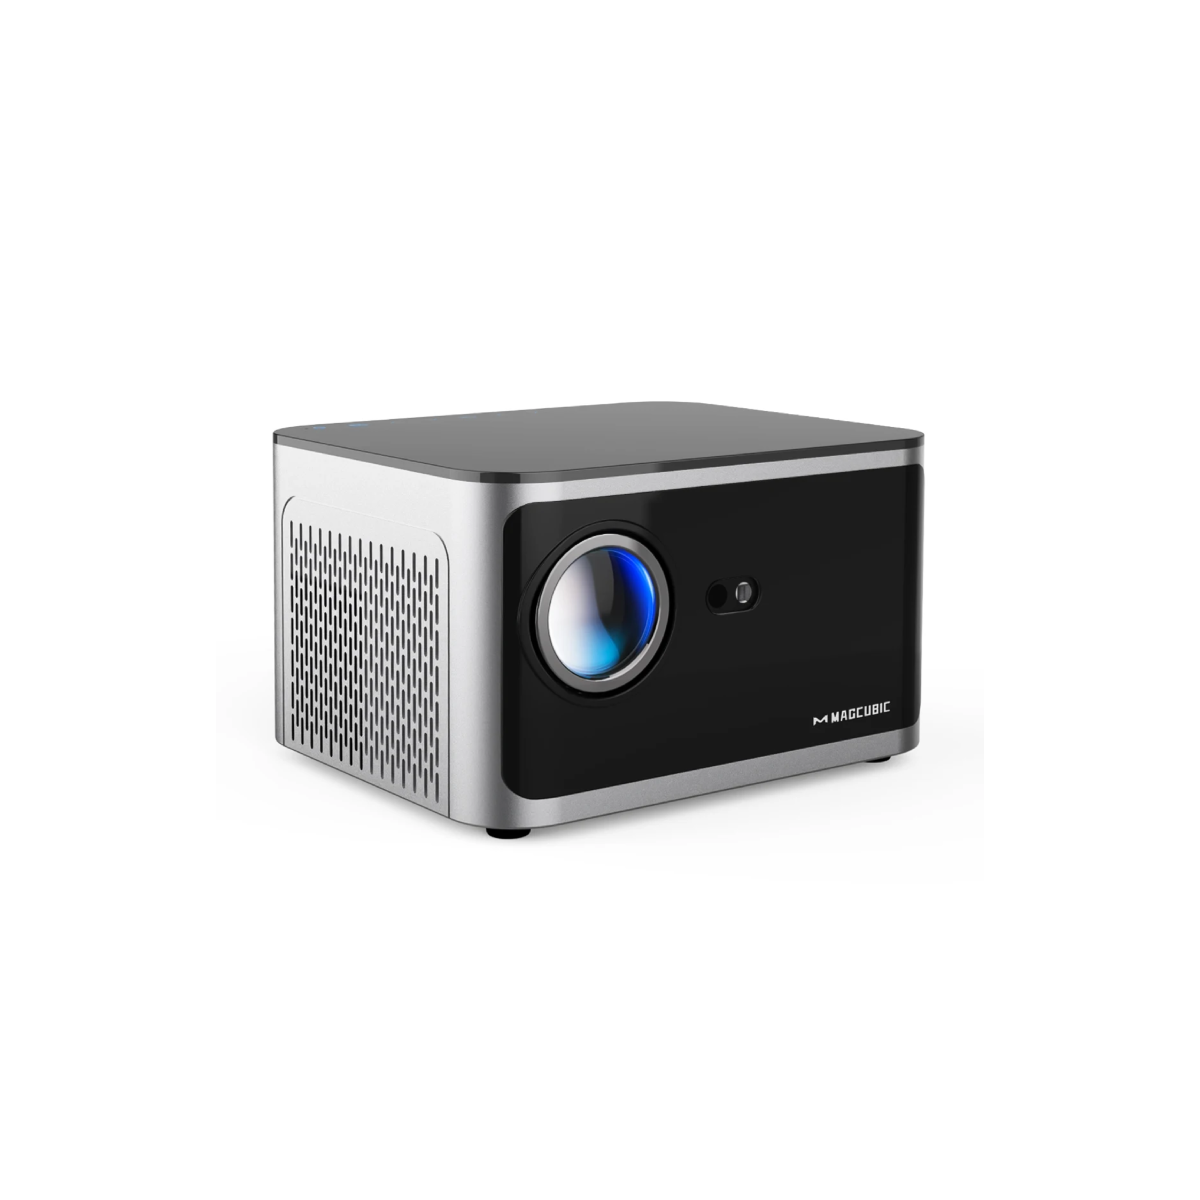 HY350+ Android 11 4K Smart Projector 580ANSI 1920*1080P Full HD Wifi6 BT5.0 Allwinner H713 Voice Control Home Cinema Theater - MAGCUBIC Provector 